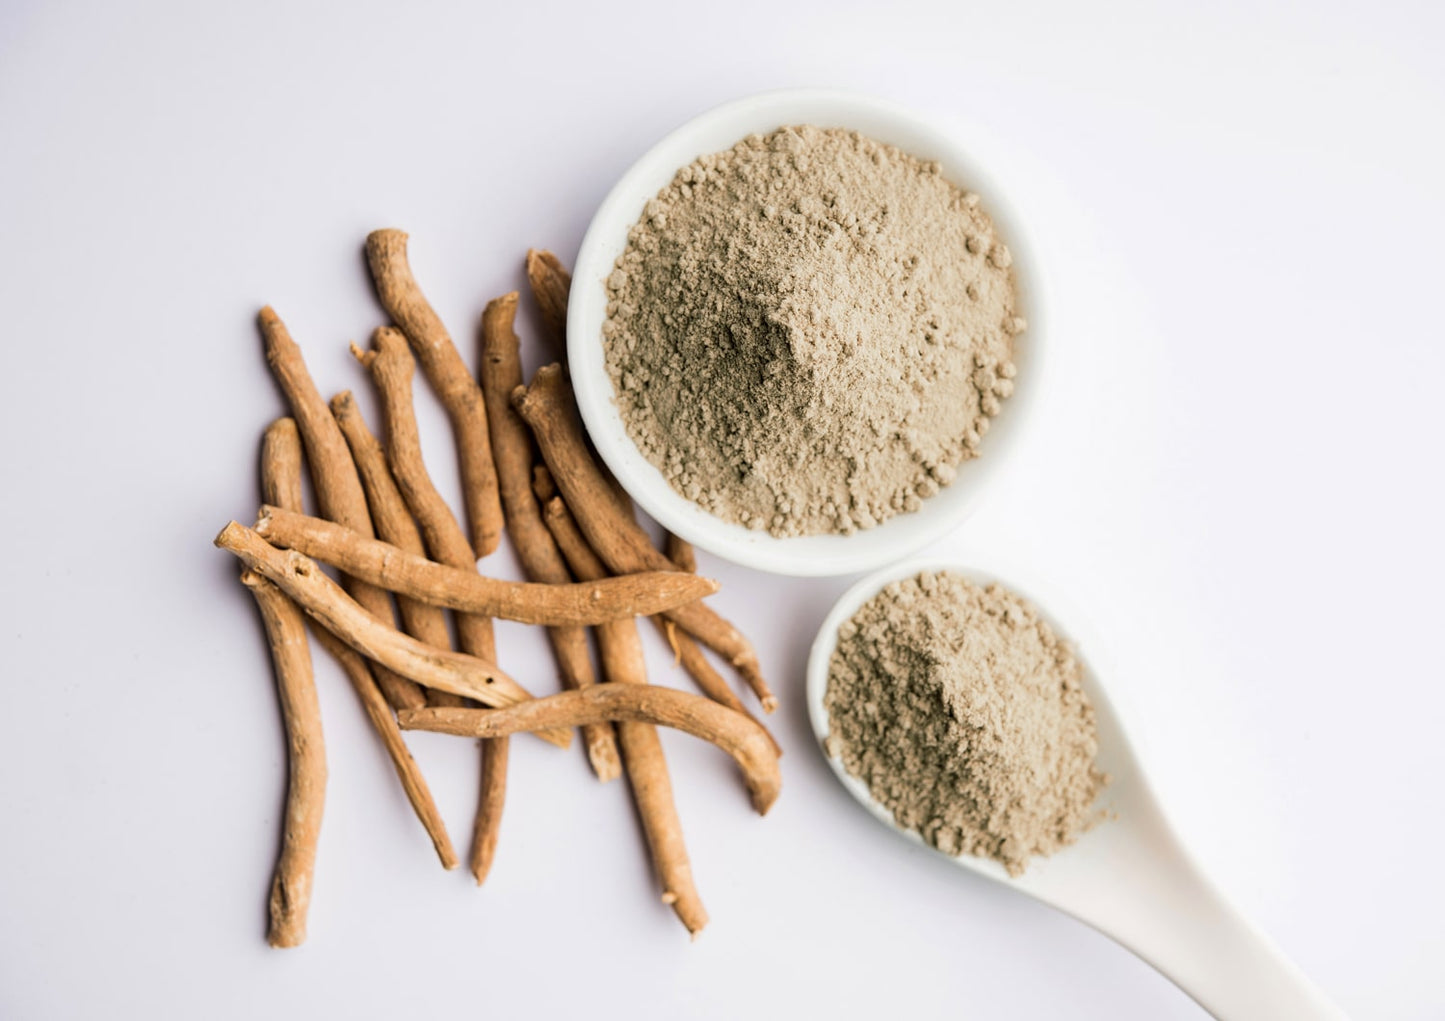 Organic Ashwagandha Root Powder – Non-GMO, Finely Ground Indian Ginseng, Pure, Raw, Ayrvedic, Vegan, Bulk. Easy to Mix. Adaptogenic Herb. Great for Desserts, Hot Beverages, and Smoothies